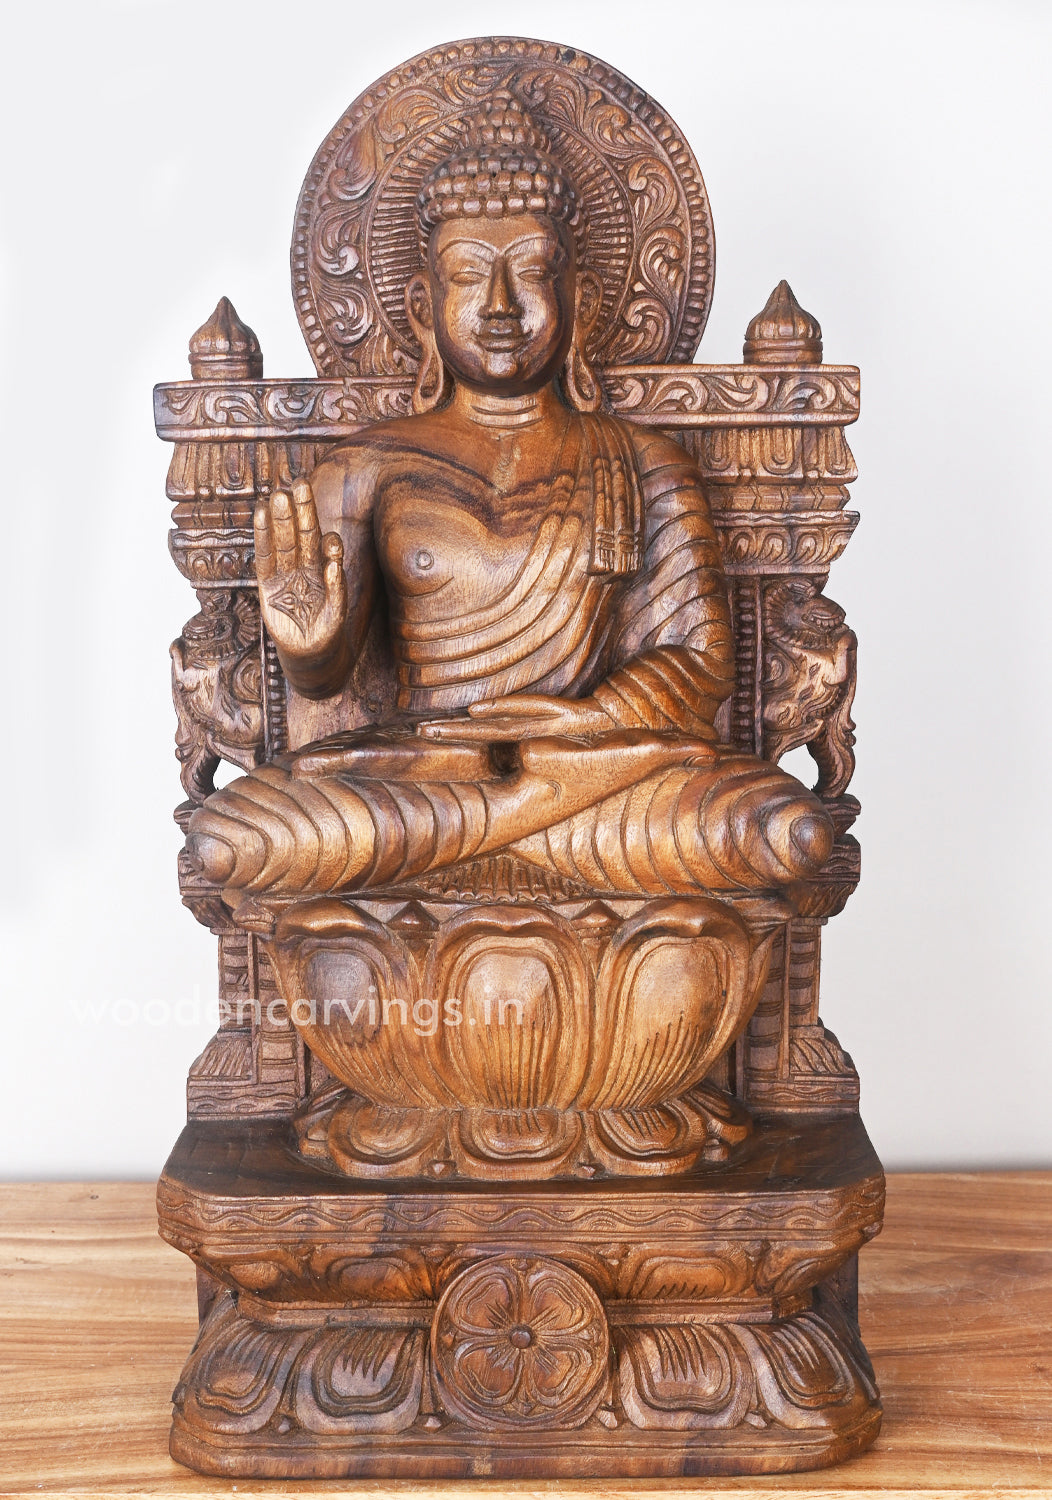 Smiling Buddha Calmly Seated on Lotus Yogasana Posture and Blessing People in Mudra Vitarka Statue 24.5"